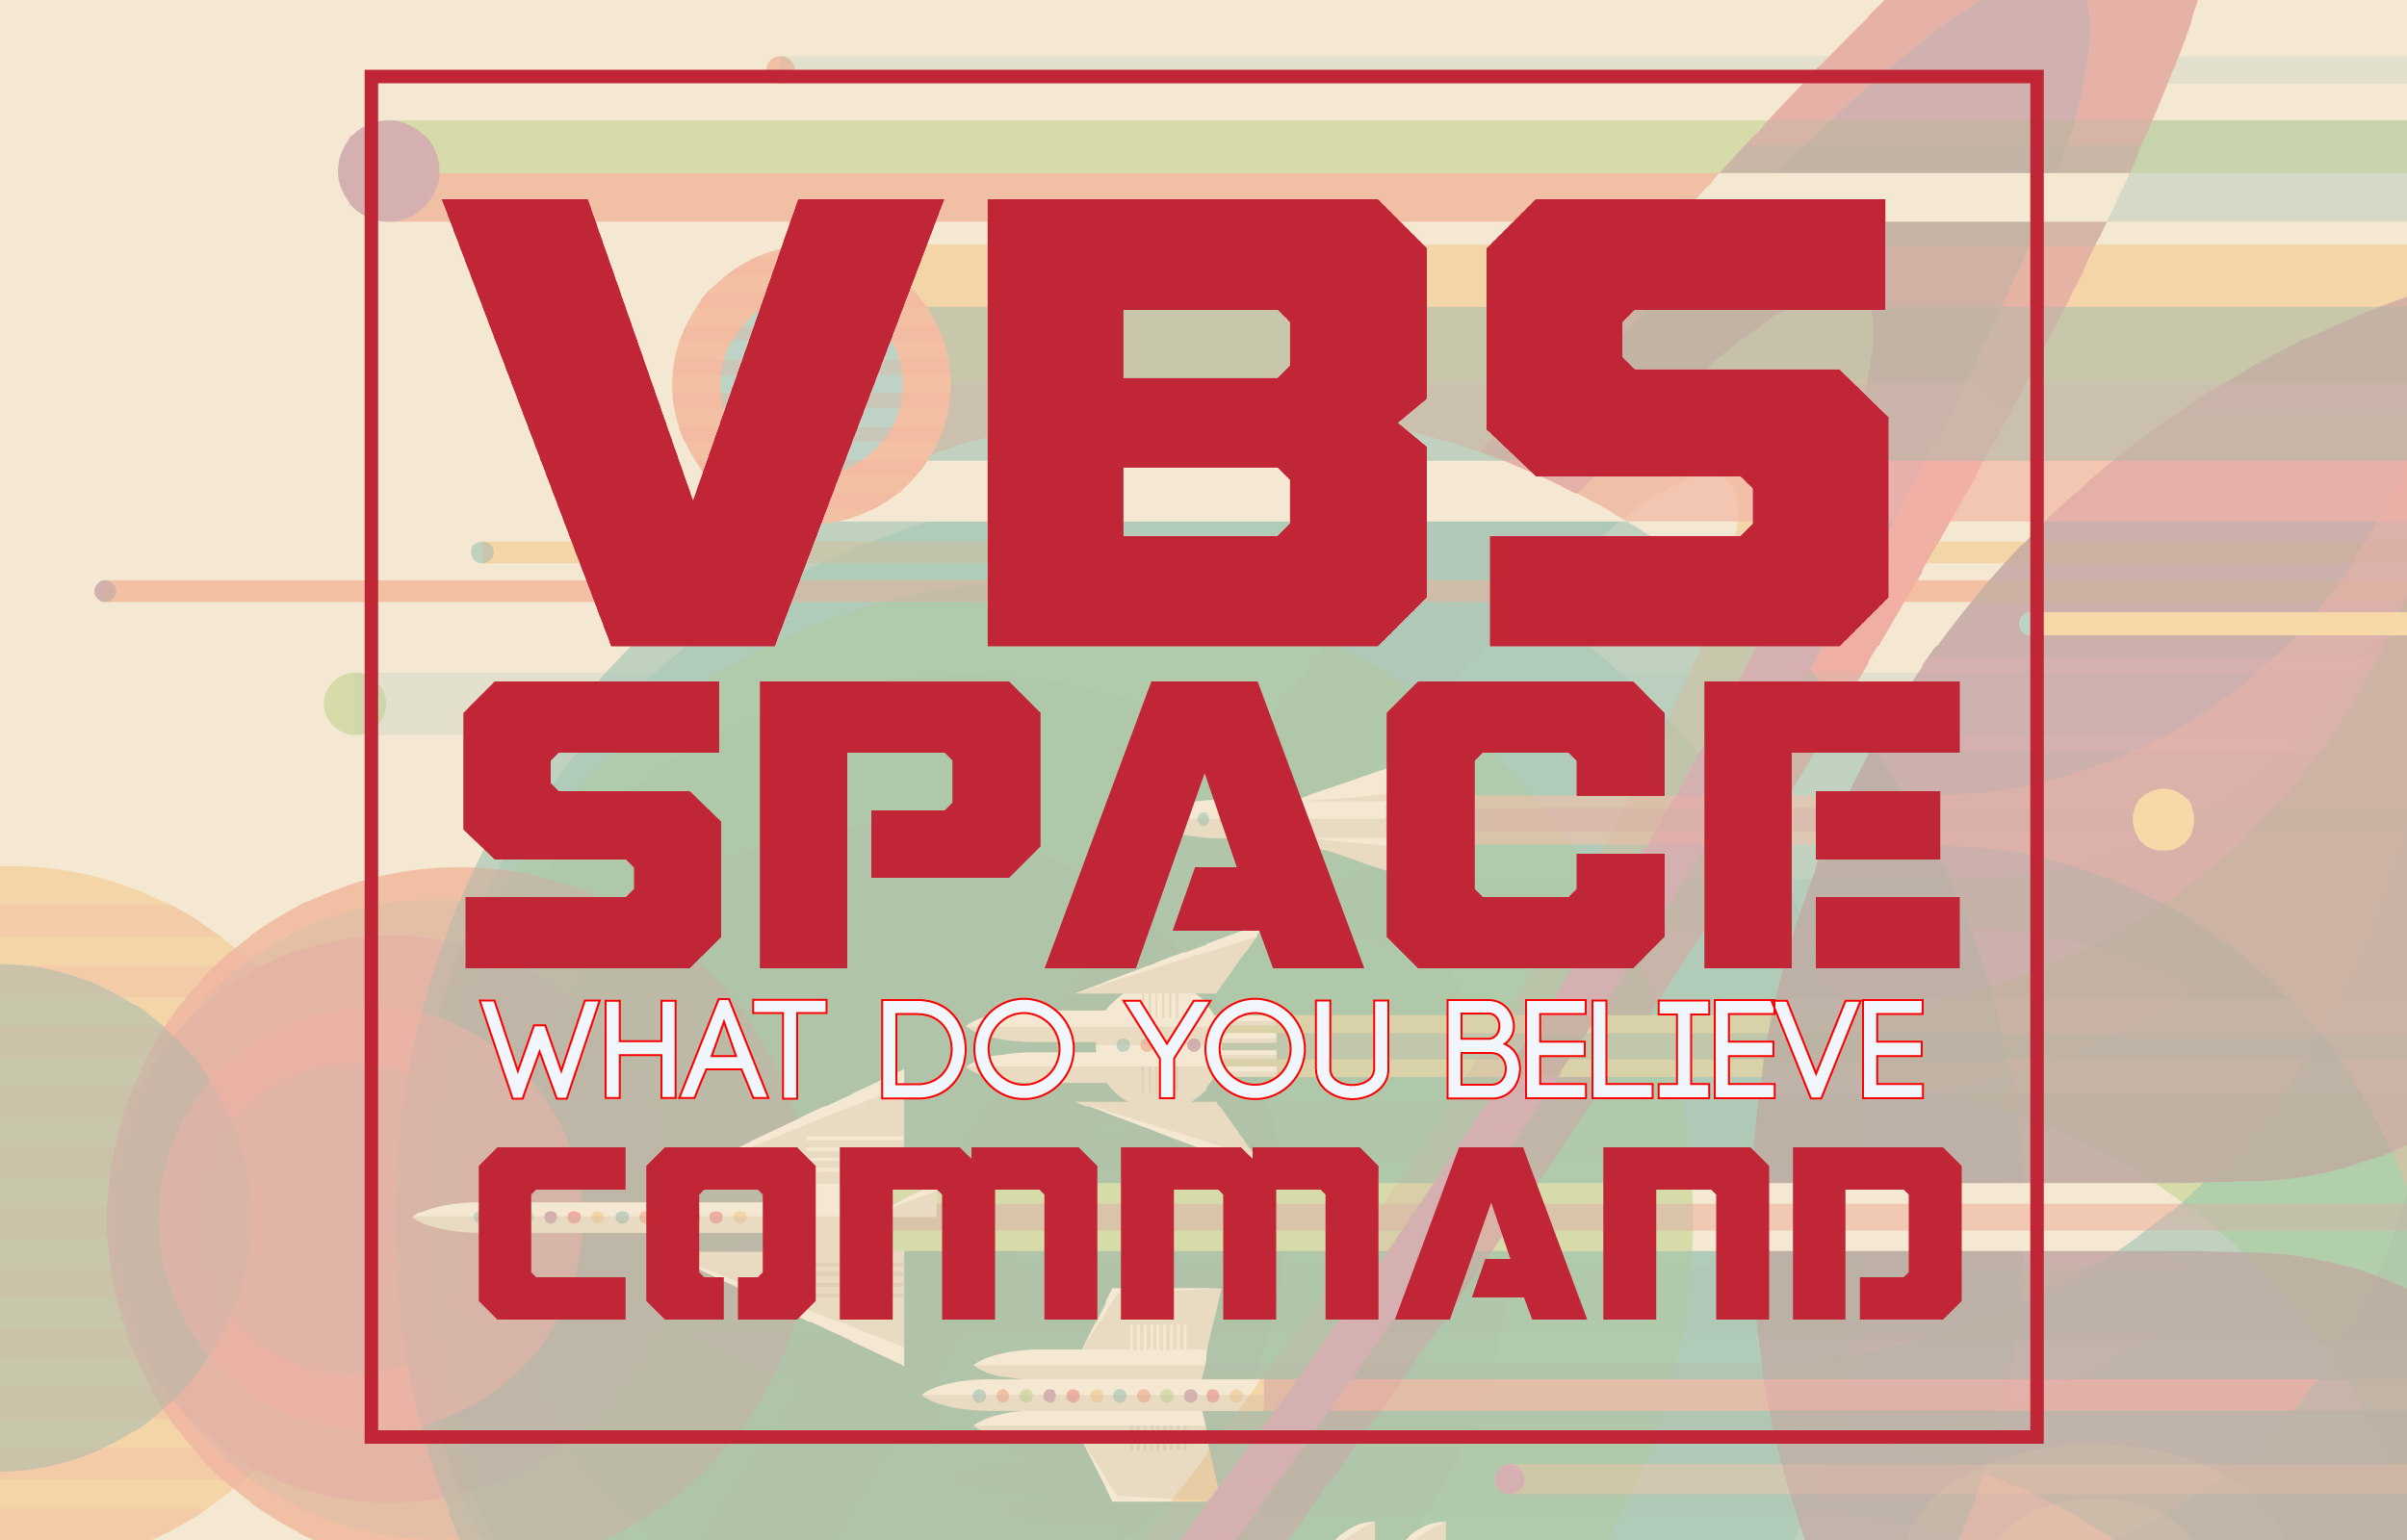 VBS Space Command